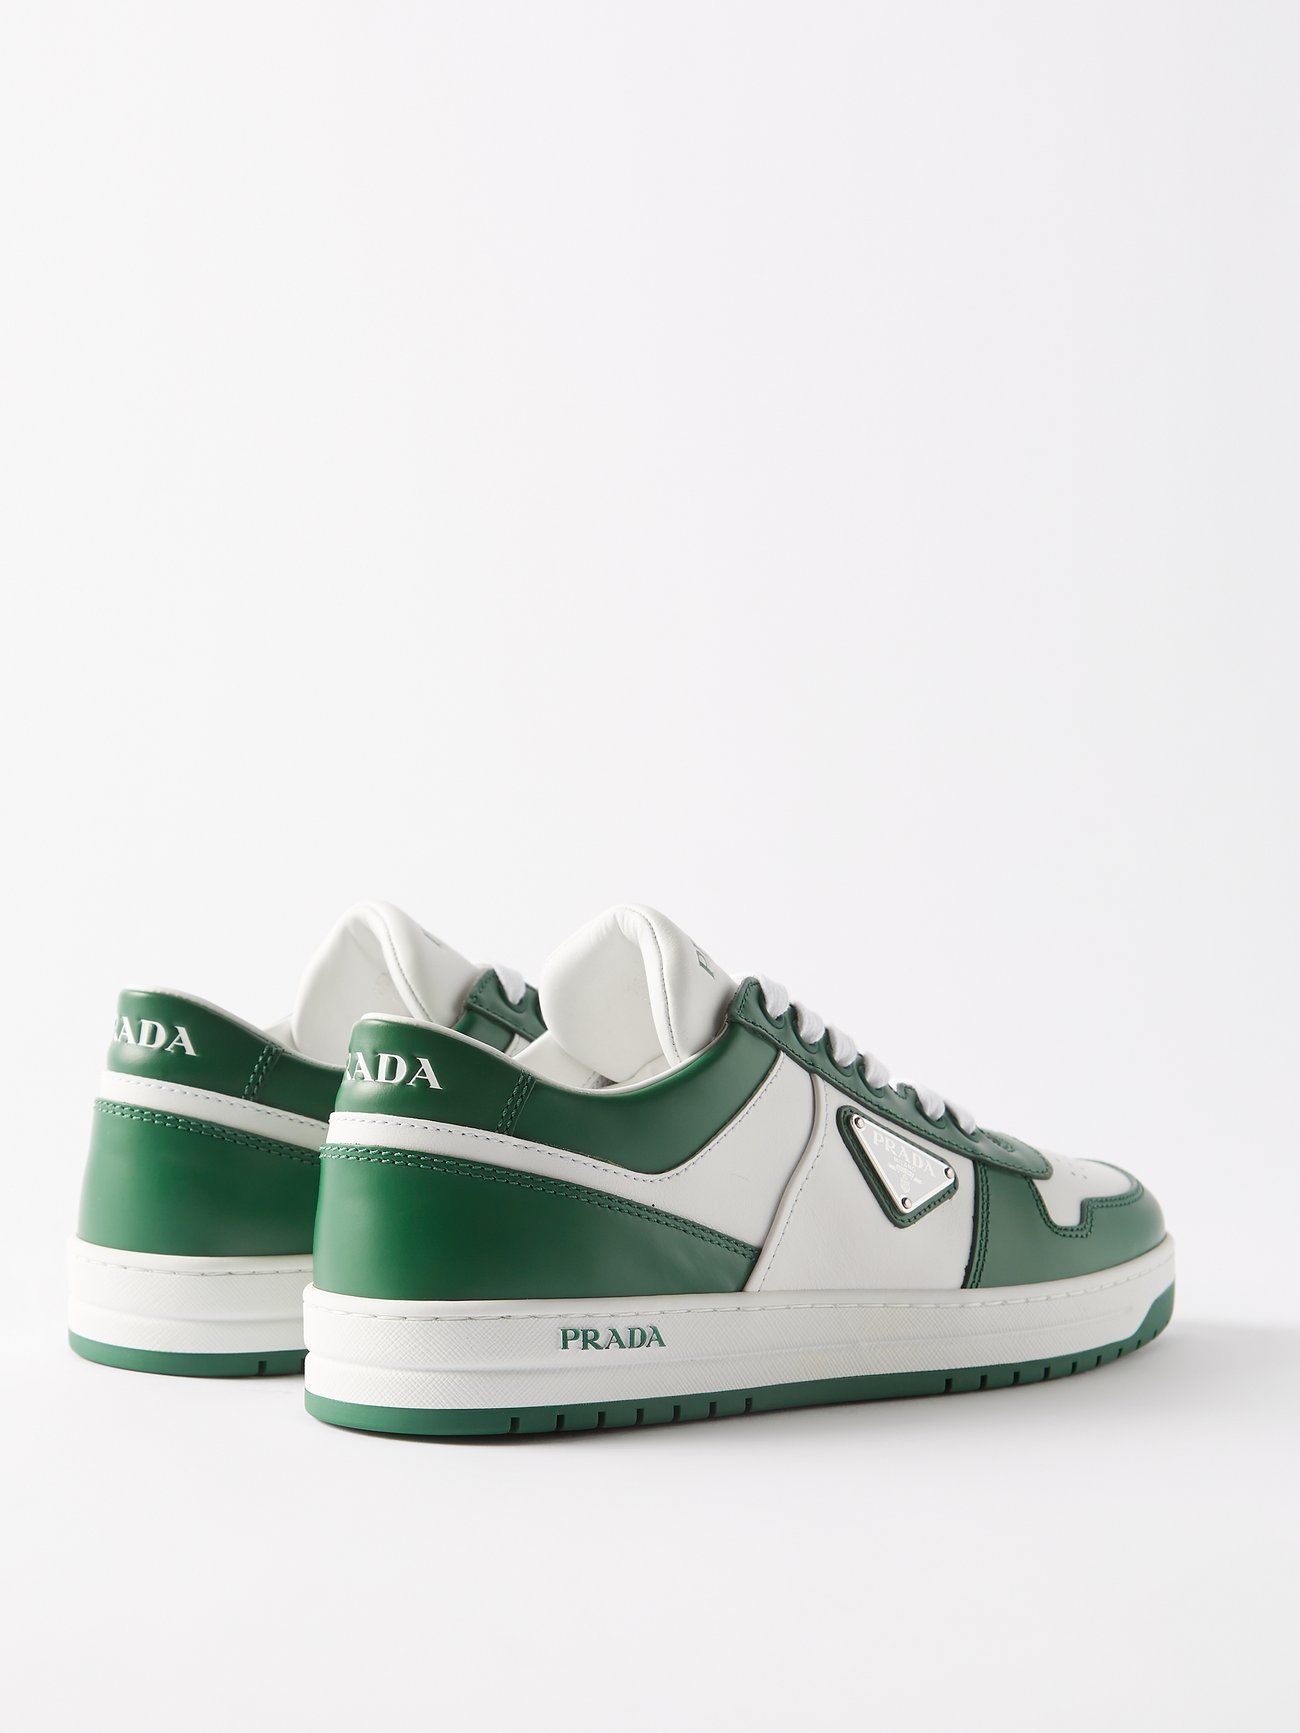 Prada Downtown Sneakers US10.5 UK9.5 White Green Teal Leather Triangle Logo  Low